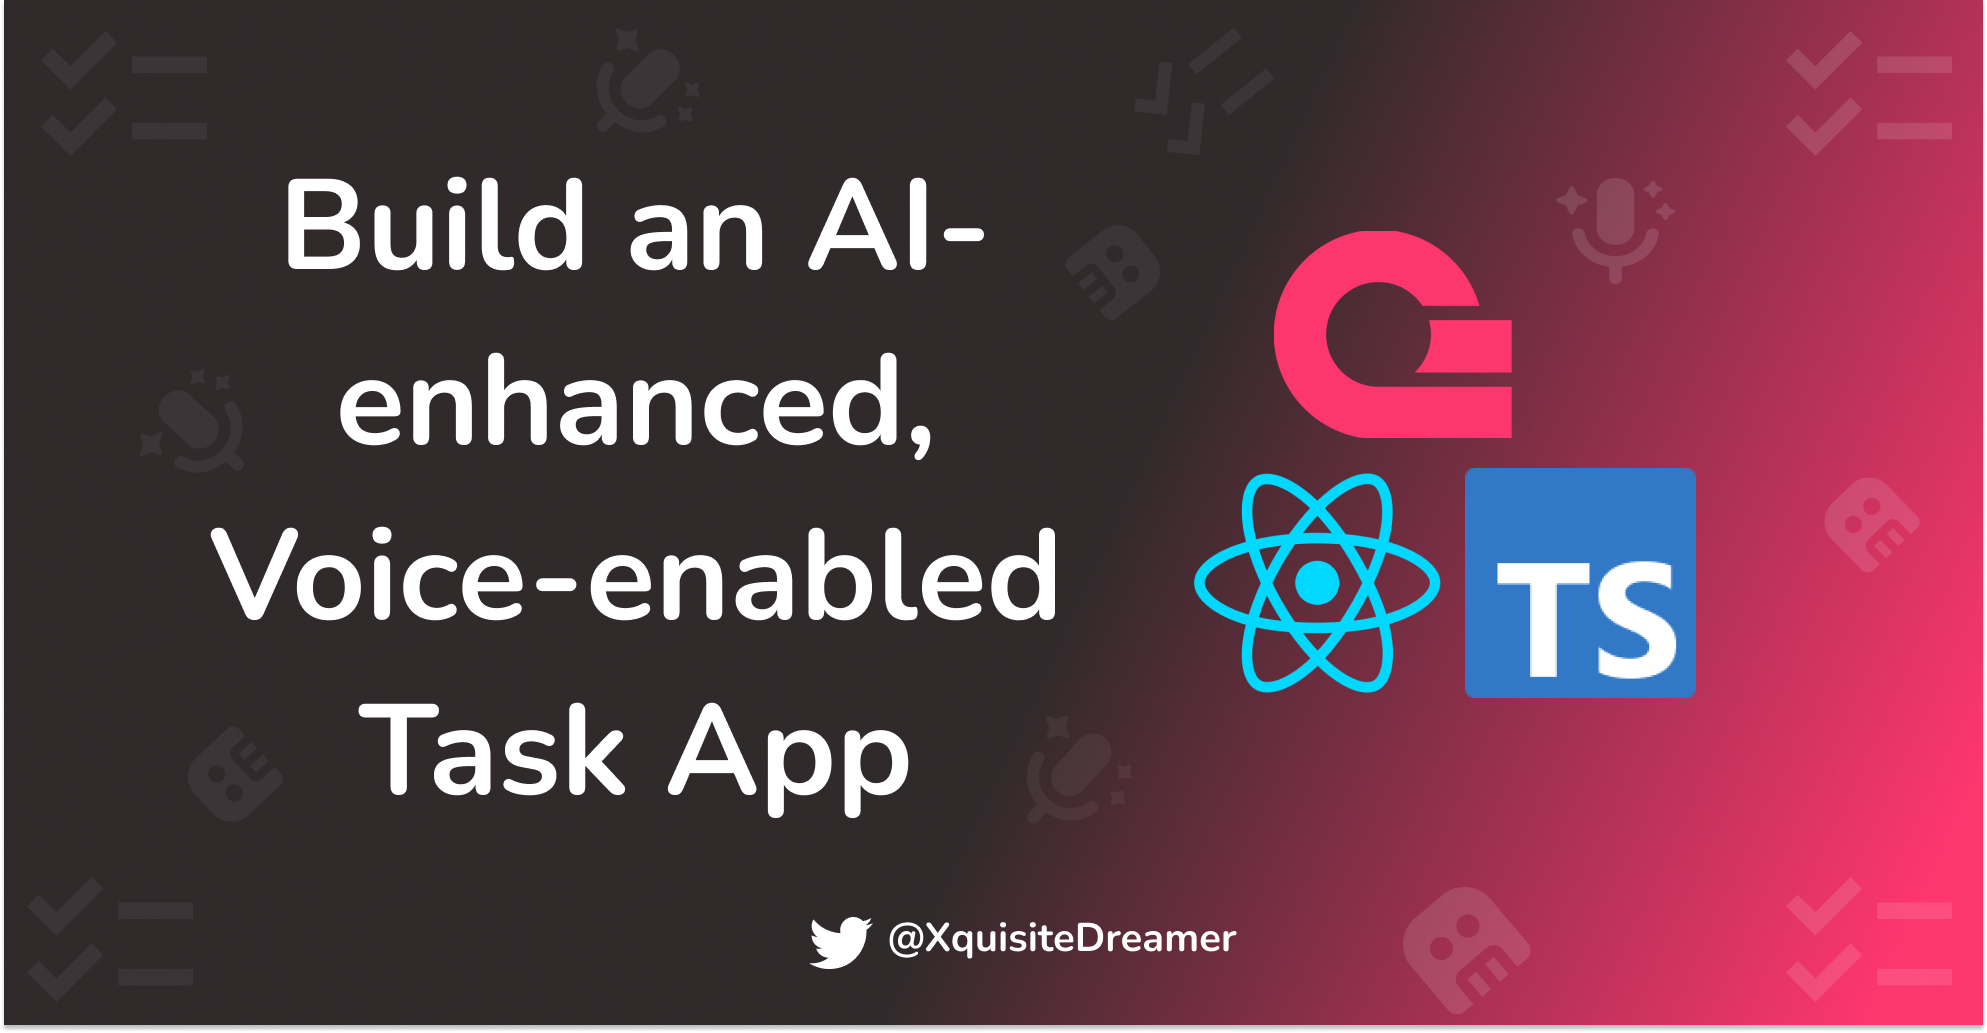 How to Build an AI-enhanced Task App with React and Appwrite